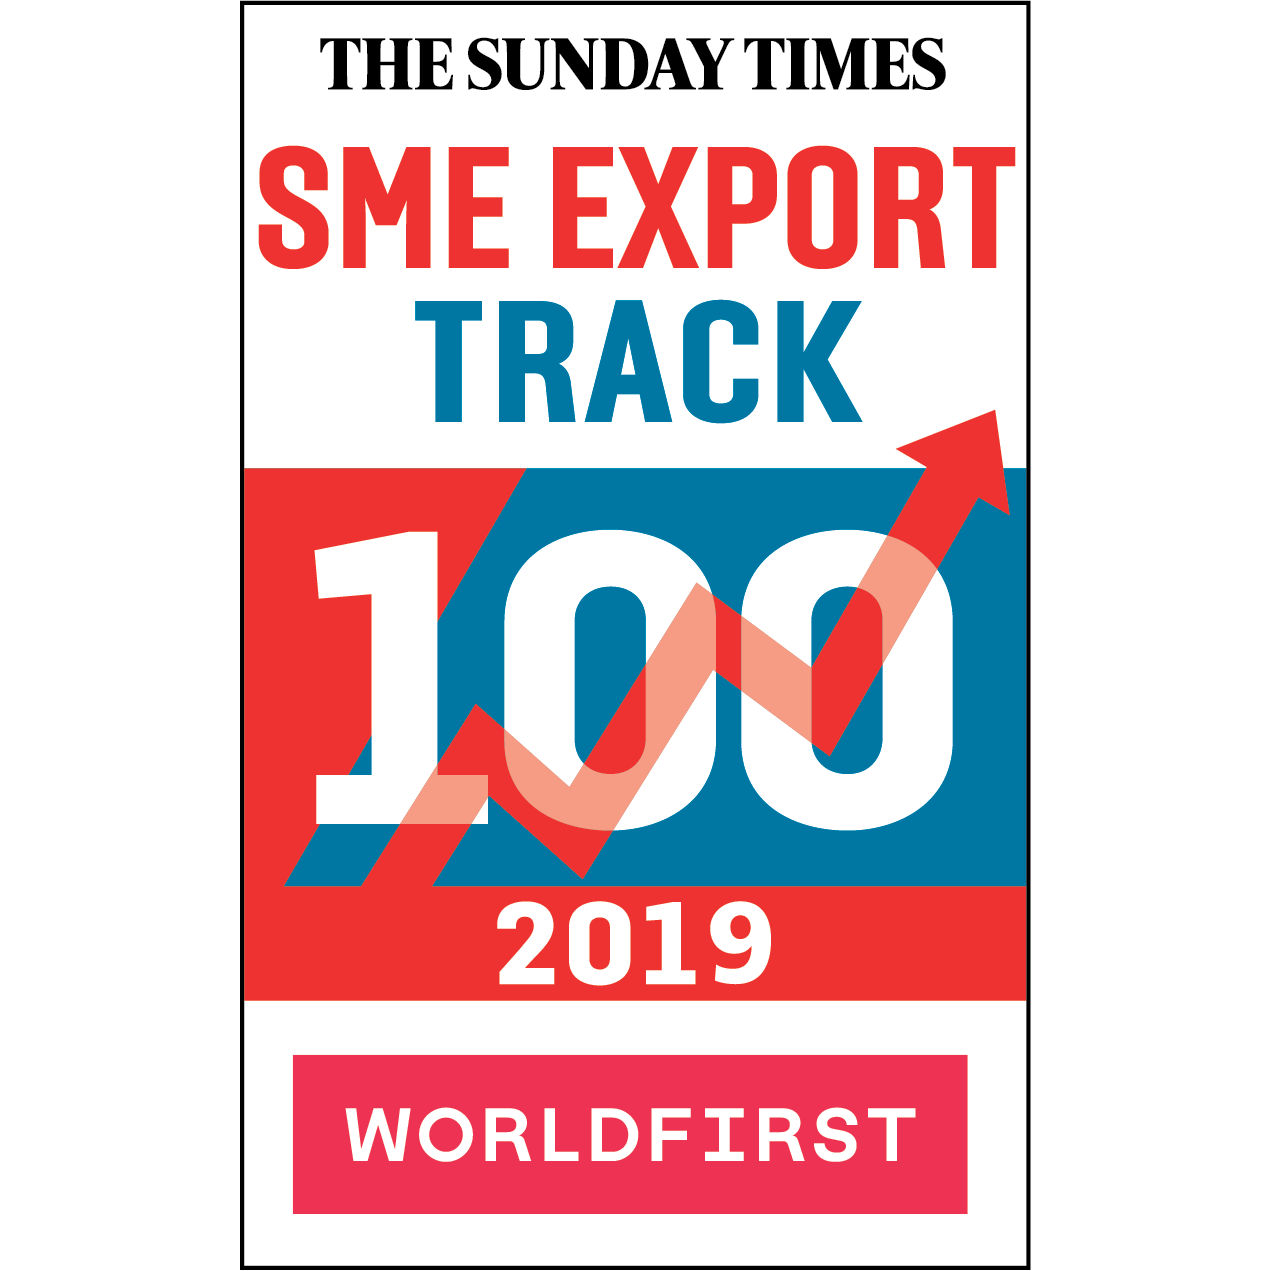 Sunday Times SME Export Track 100 badge